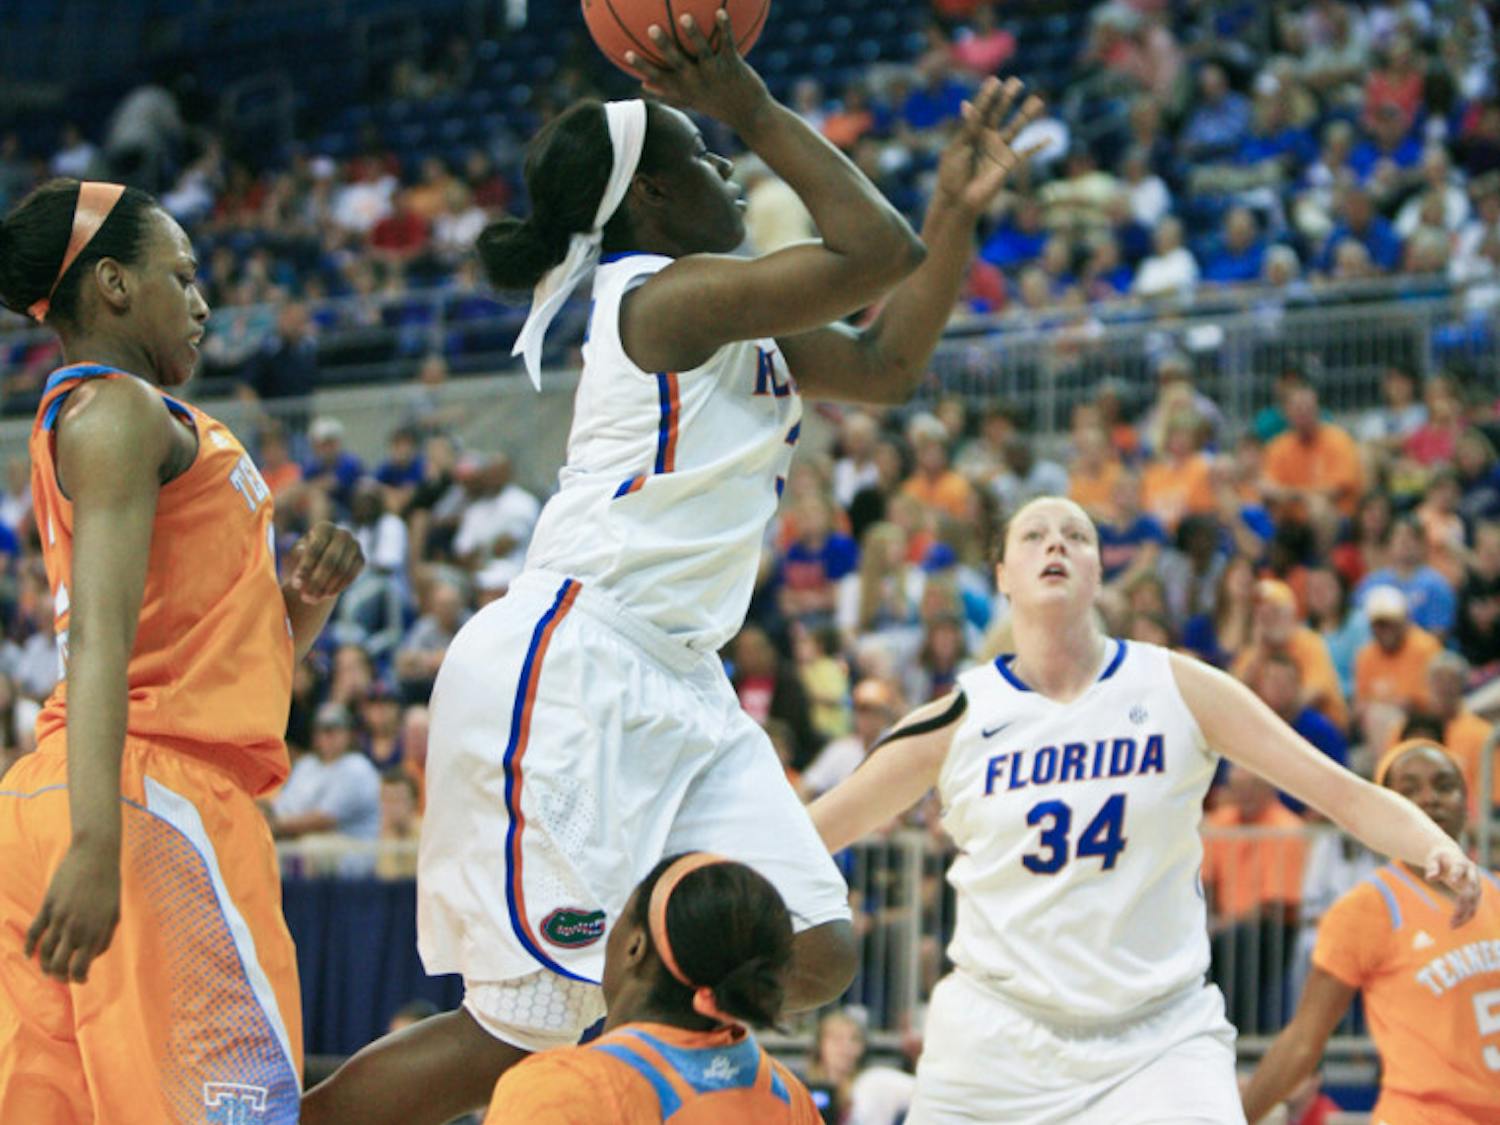 January Miller (right) attempts a shot during Florida’s 78-75 overtime loss to Tennessee on Sunday at home.
